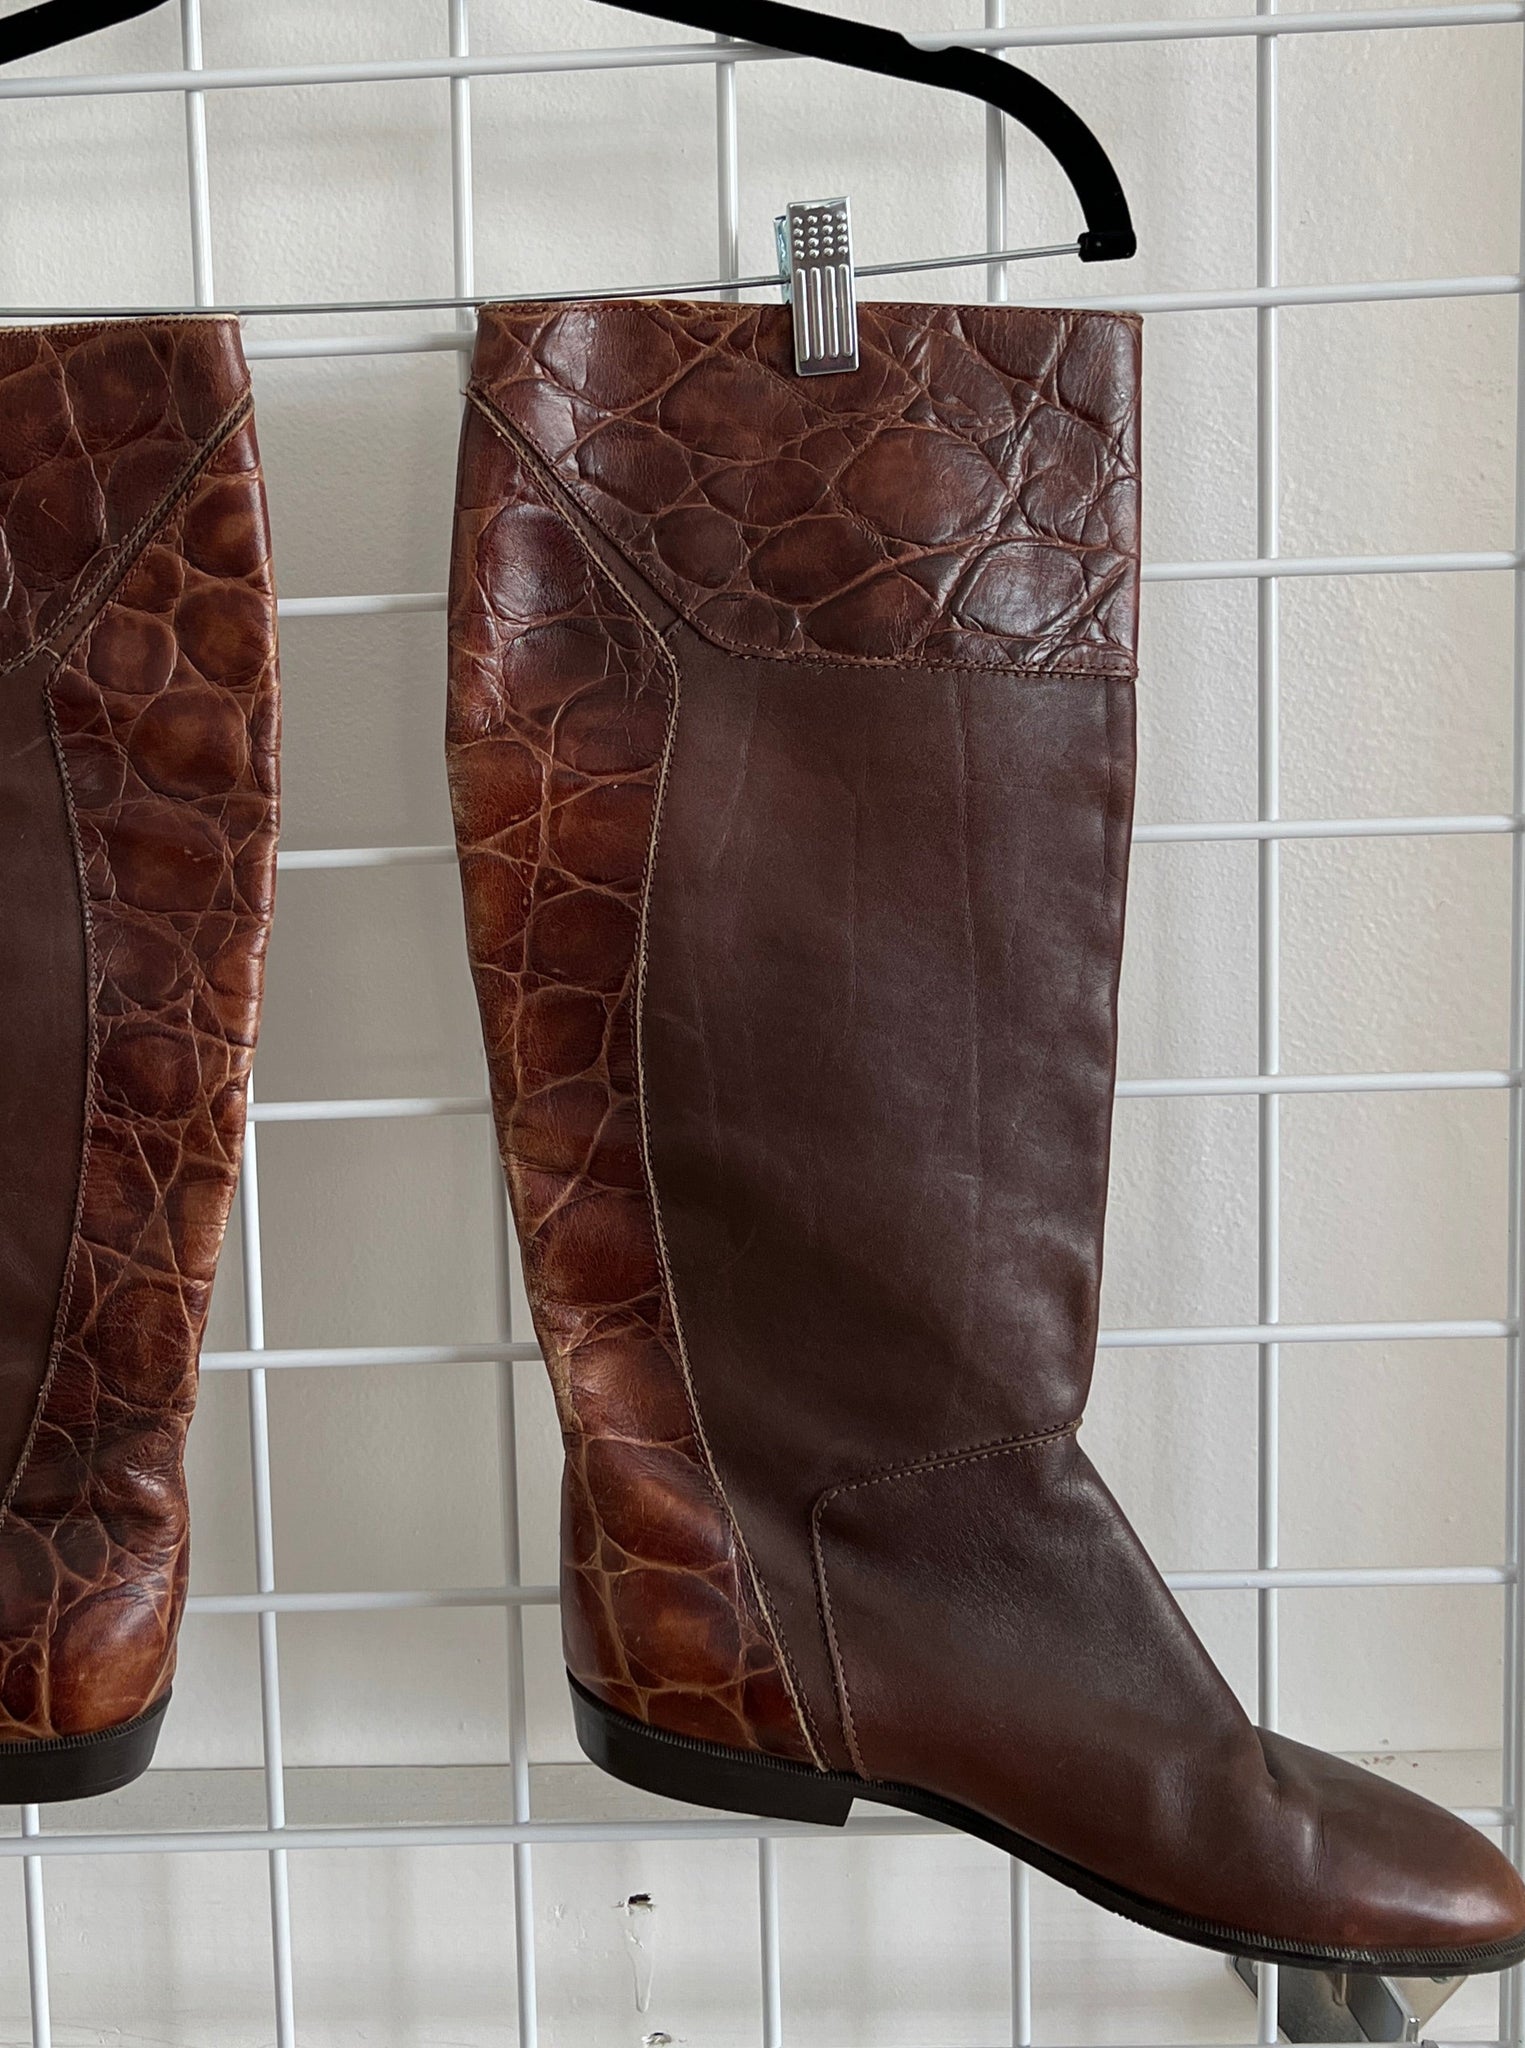 1980s SHOES- BOOTS- Filanto brown riding boots